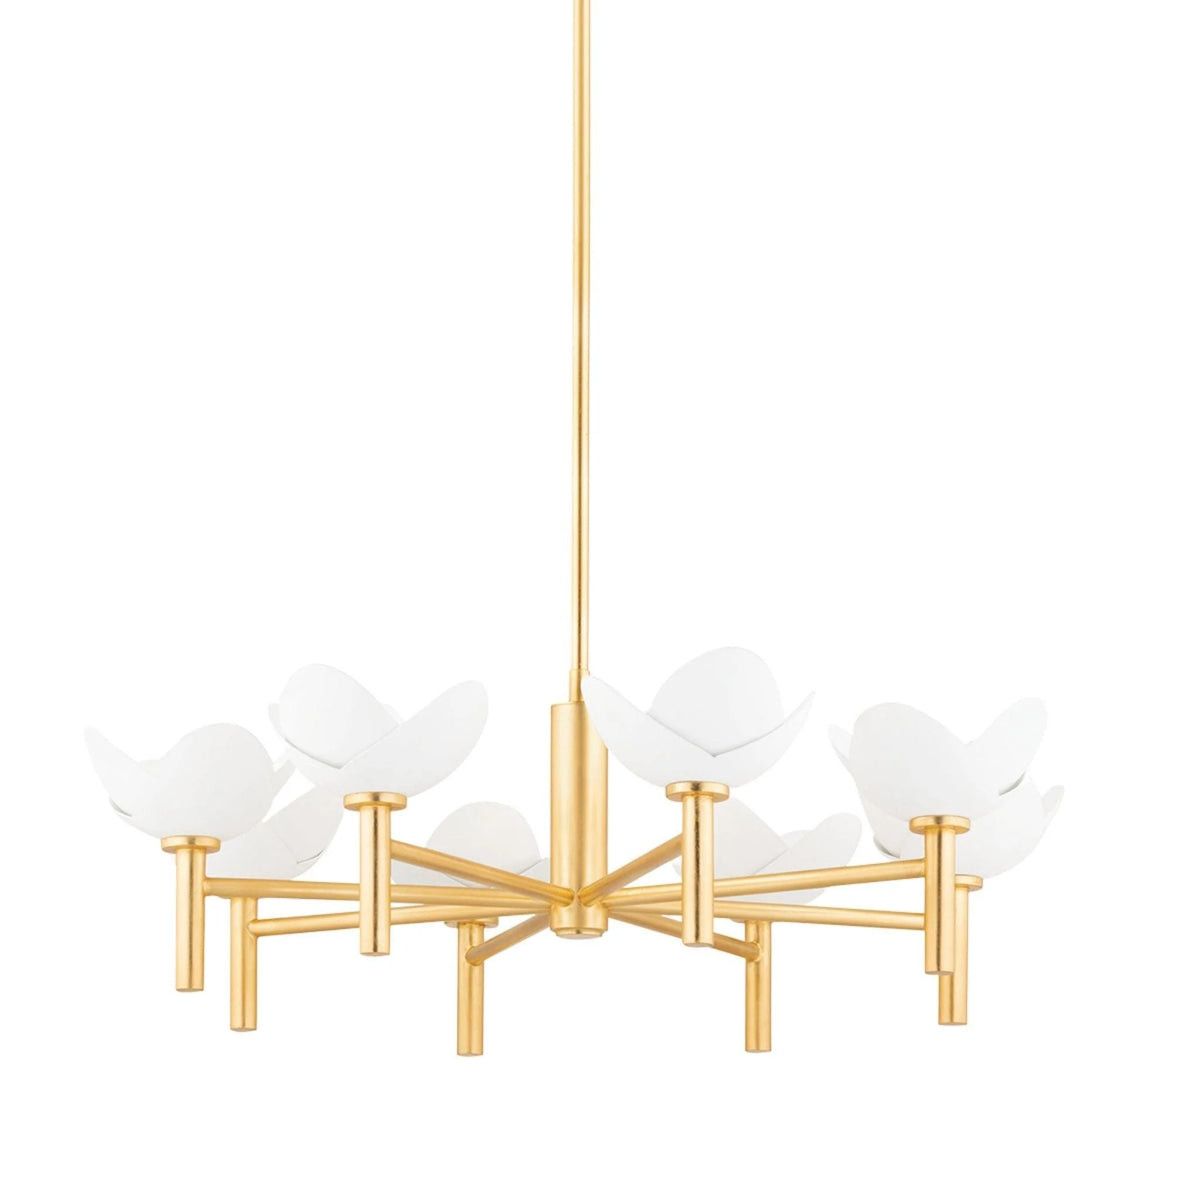 Hudson Valley Dawson Gold Leaf & Plaster Eight Light Chandelier | The Well Appointed House, LLC